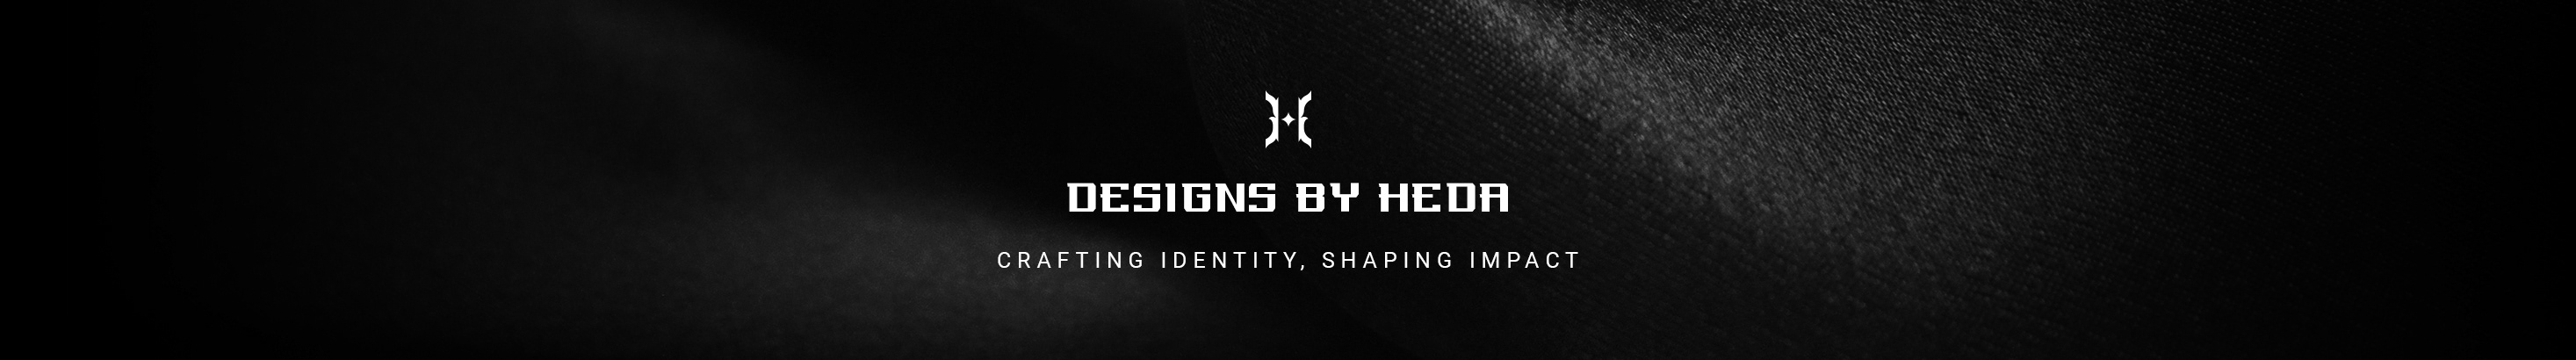 Designs by Heda™'s profile banner